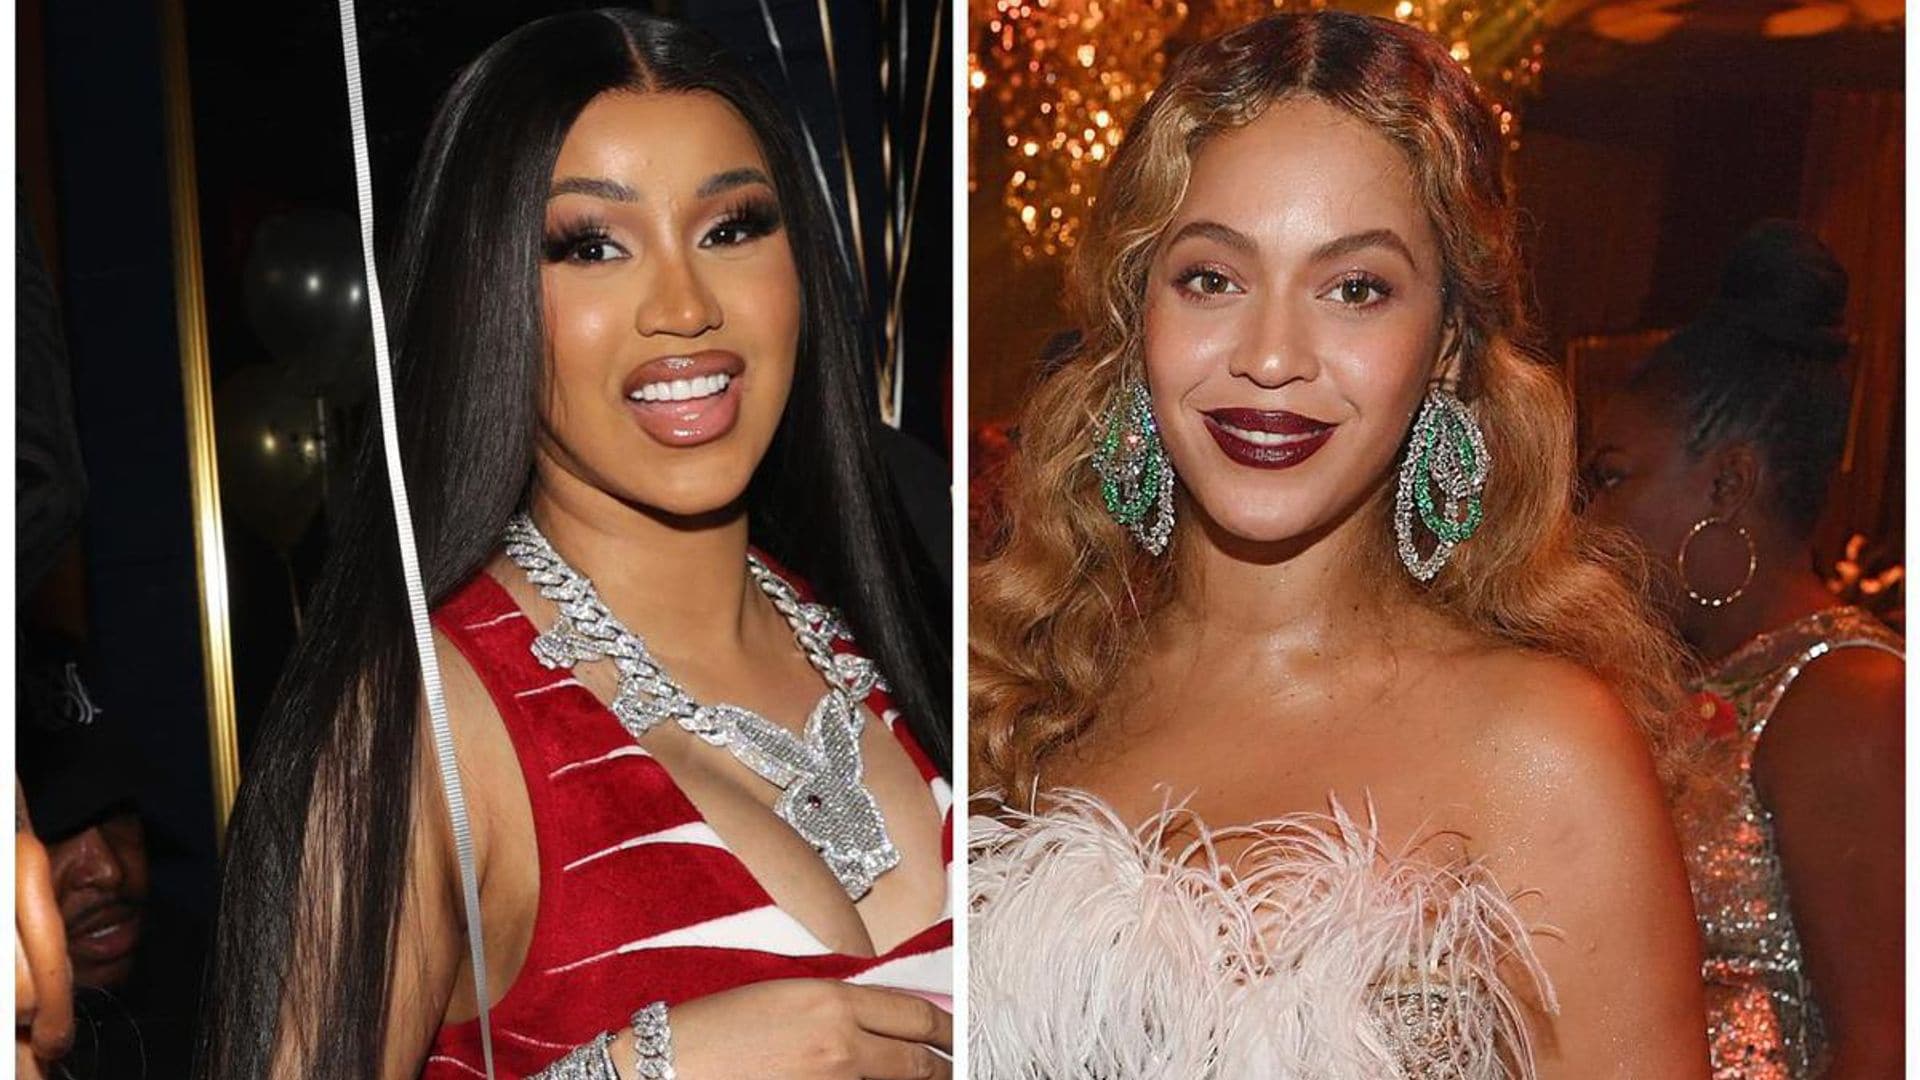 Cardi B shares her excitement receiving unique gift from Beyoncé: ‘I feel so special’